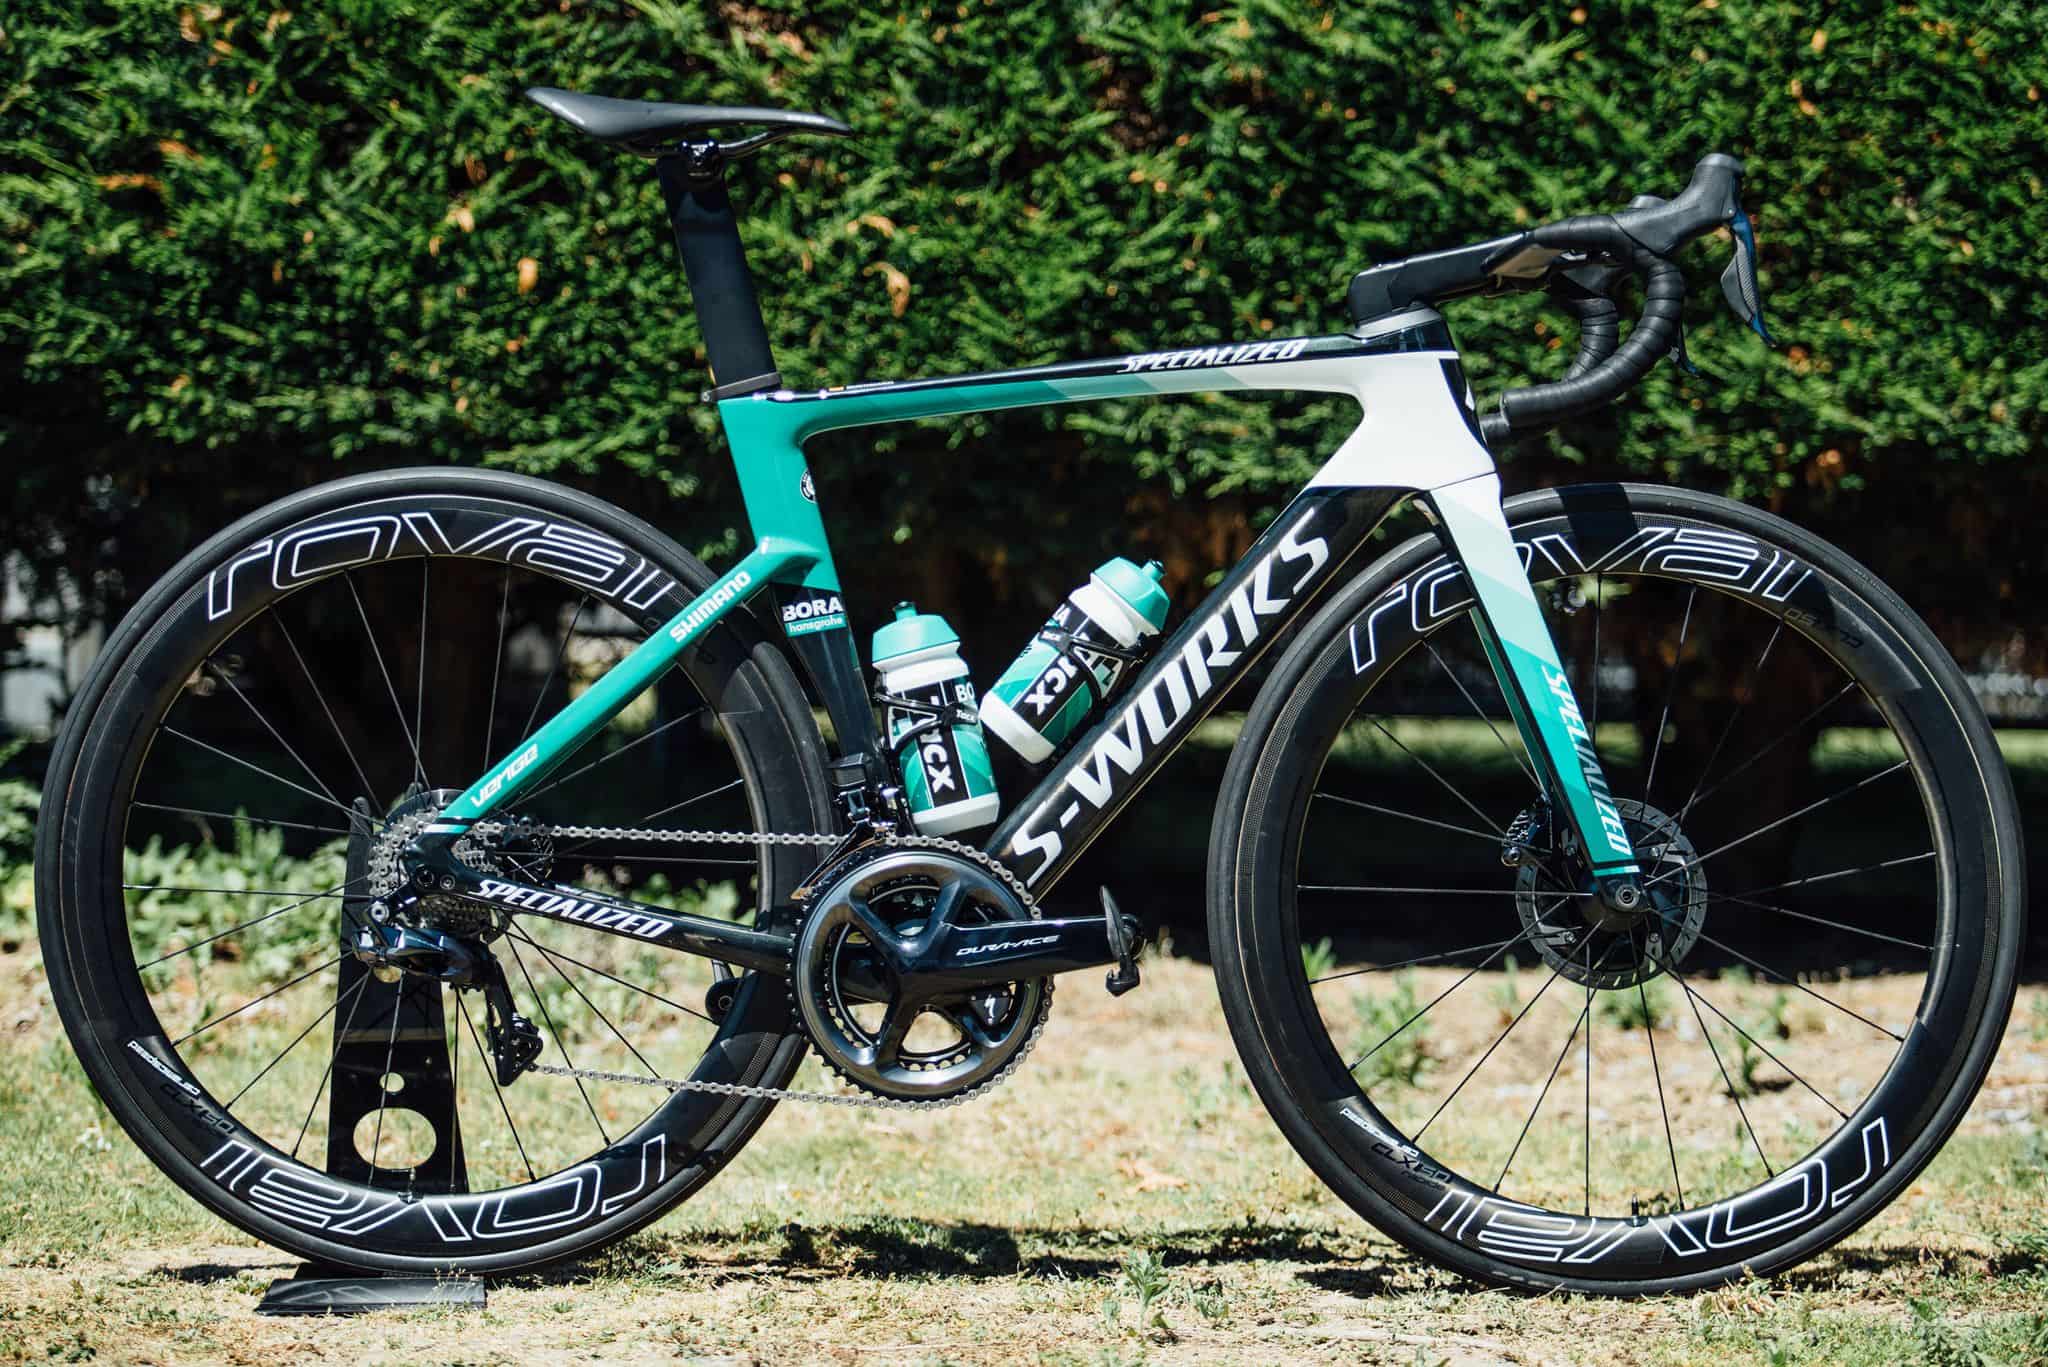 The Fastest Bikes Of The 2019 Tour de France! Bicycling